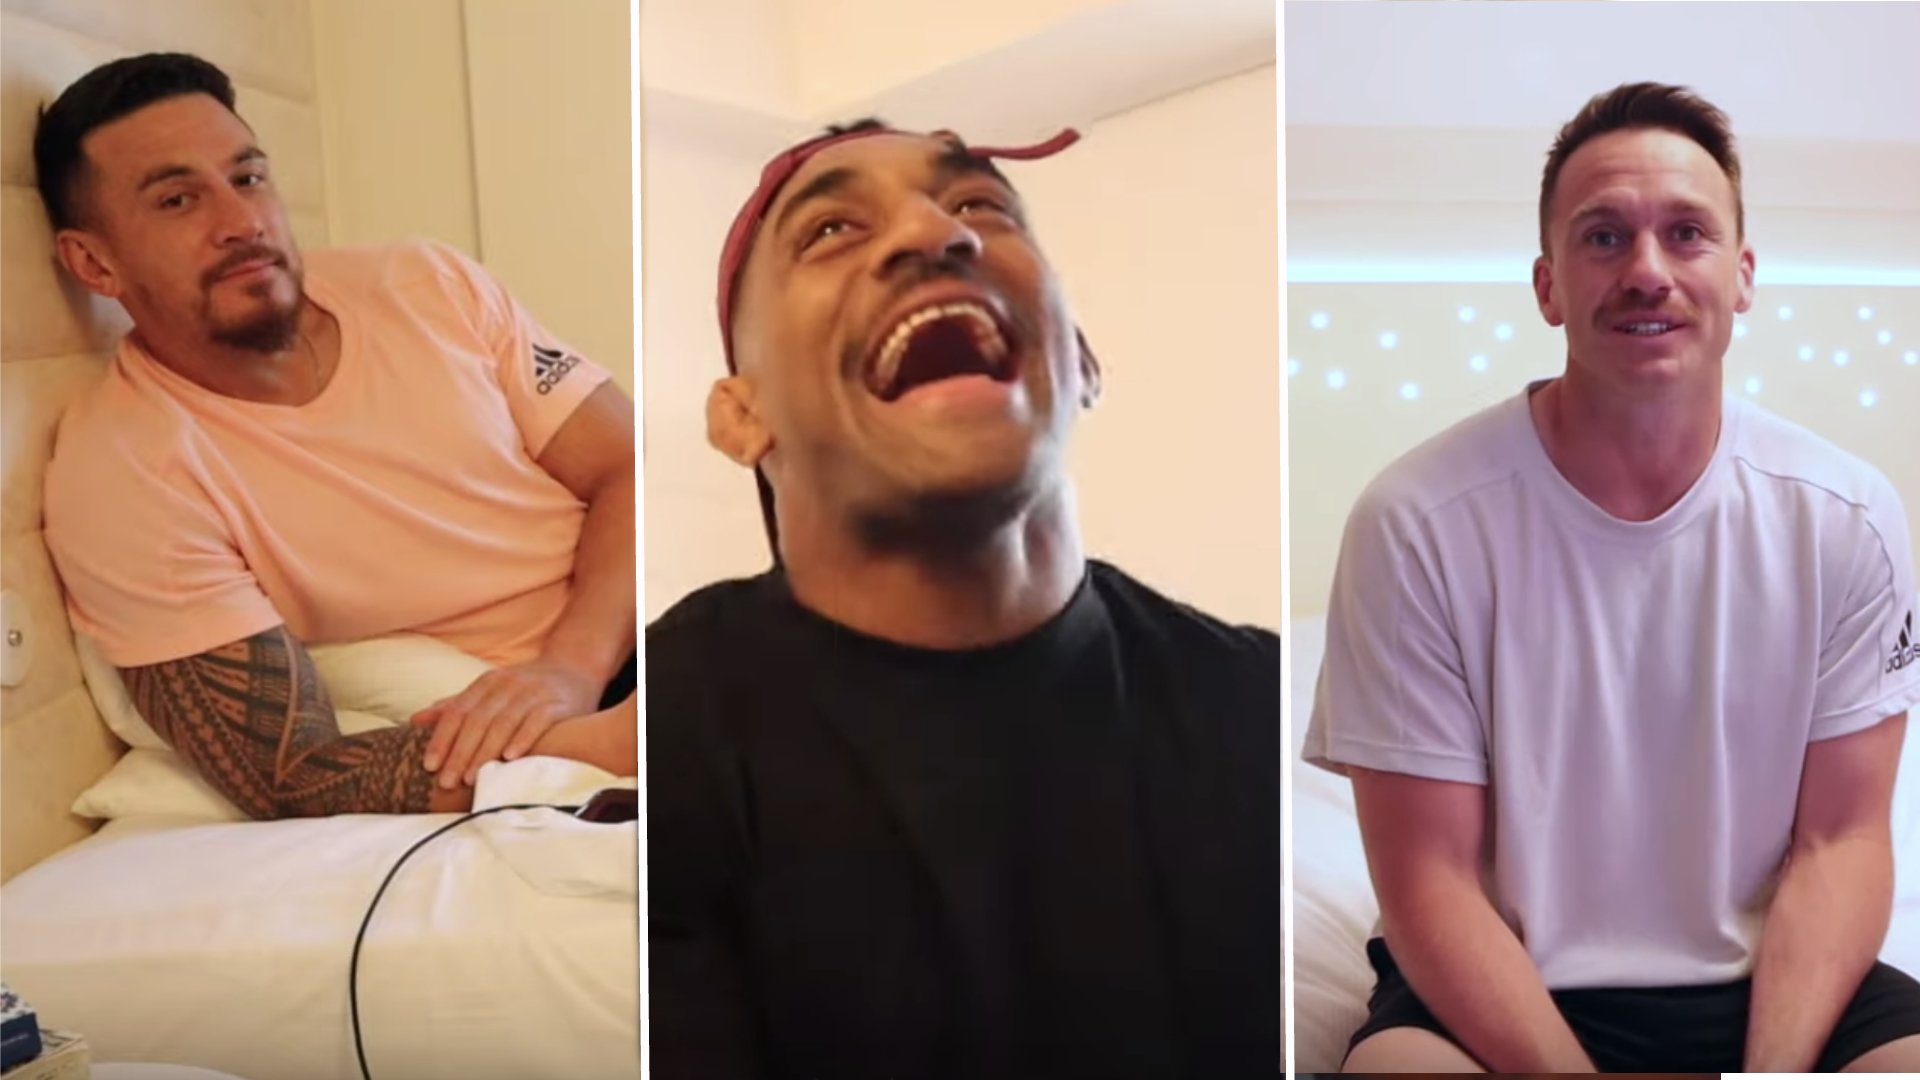 All Blacks stars come across extremely well in intimate player-made VLOG